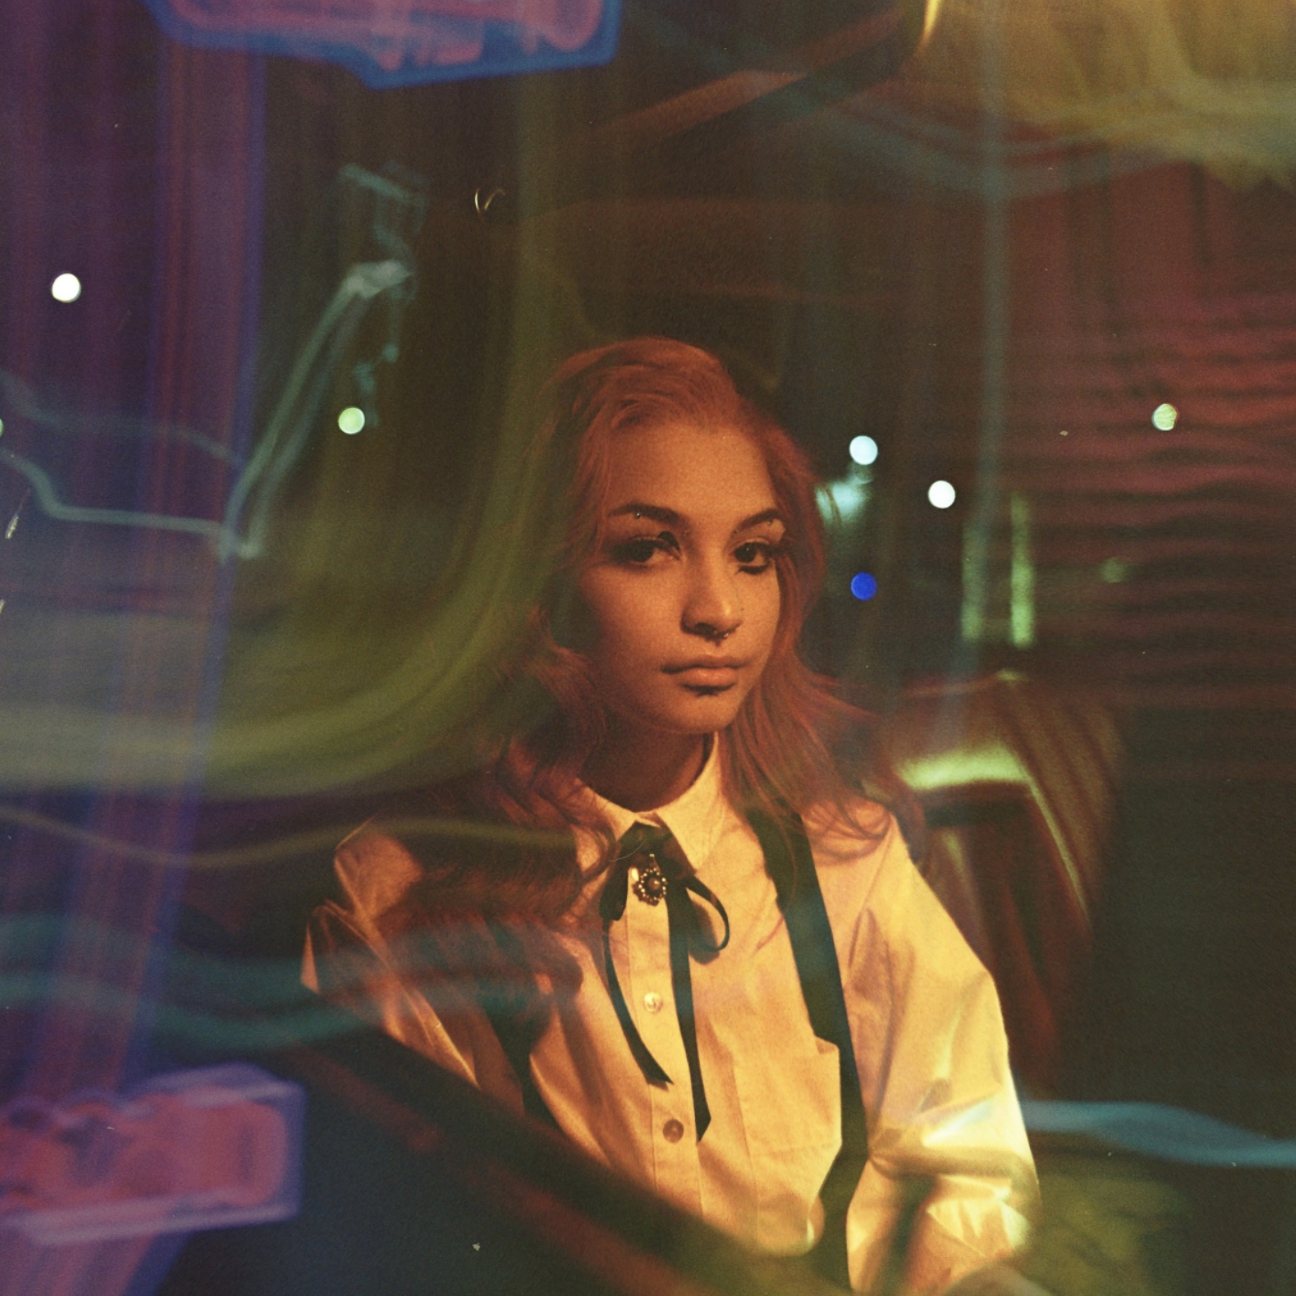 Ambar Lucid unveils her riveting retro single and accompanying visuals